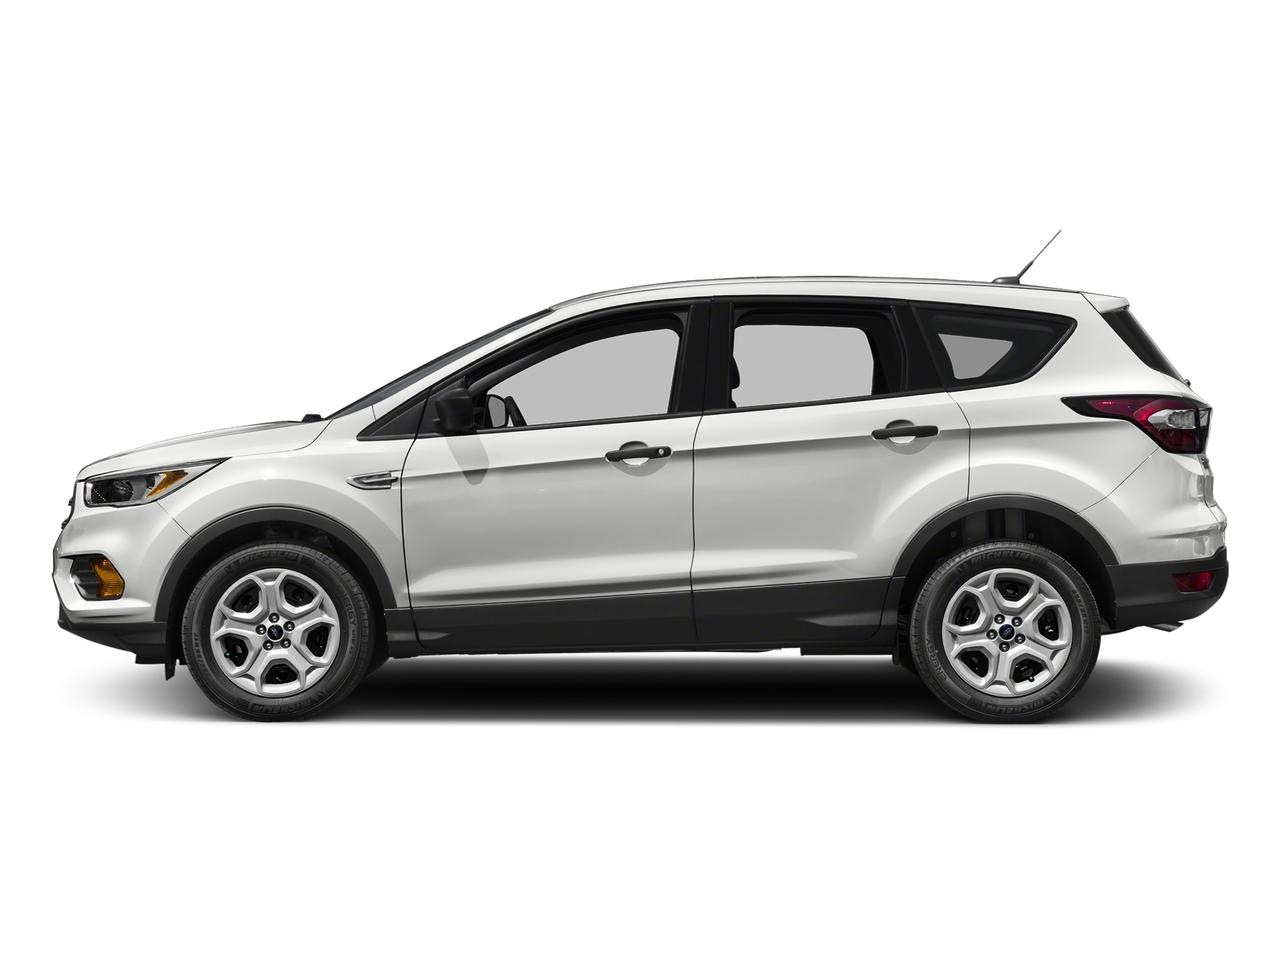 Used 2017 Ford Escape SE with VIN 1FMCU9GD0HUC75480 for sale in Morgantown, WV